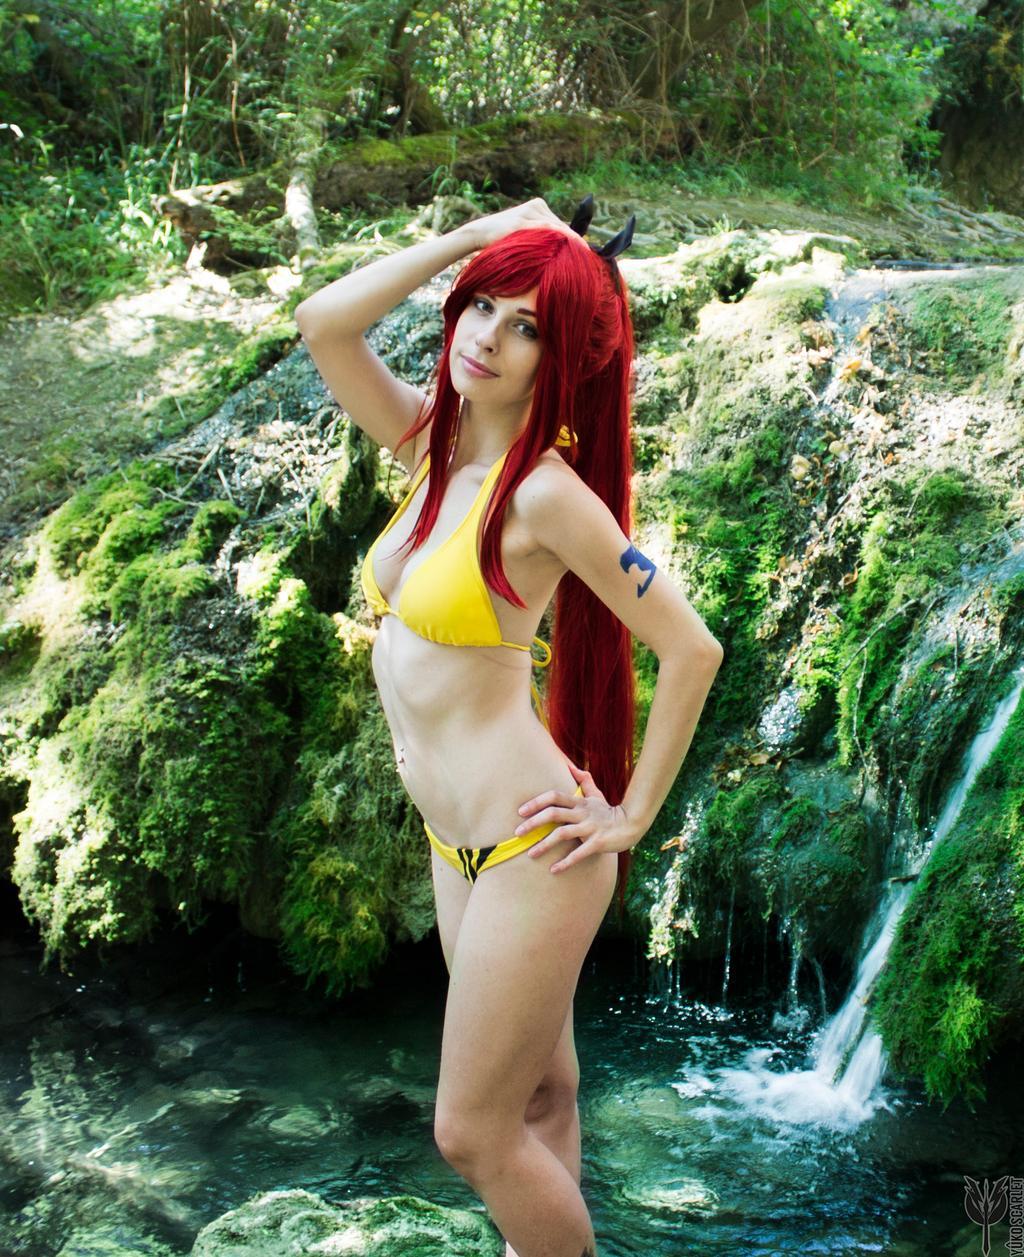 70+ Hot Pictures Of Erza Scarlet from Fairy Tale Which Will Leave You Dumbstruck 18